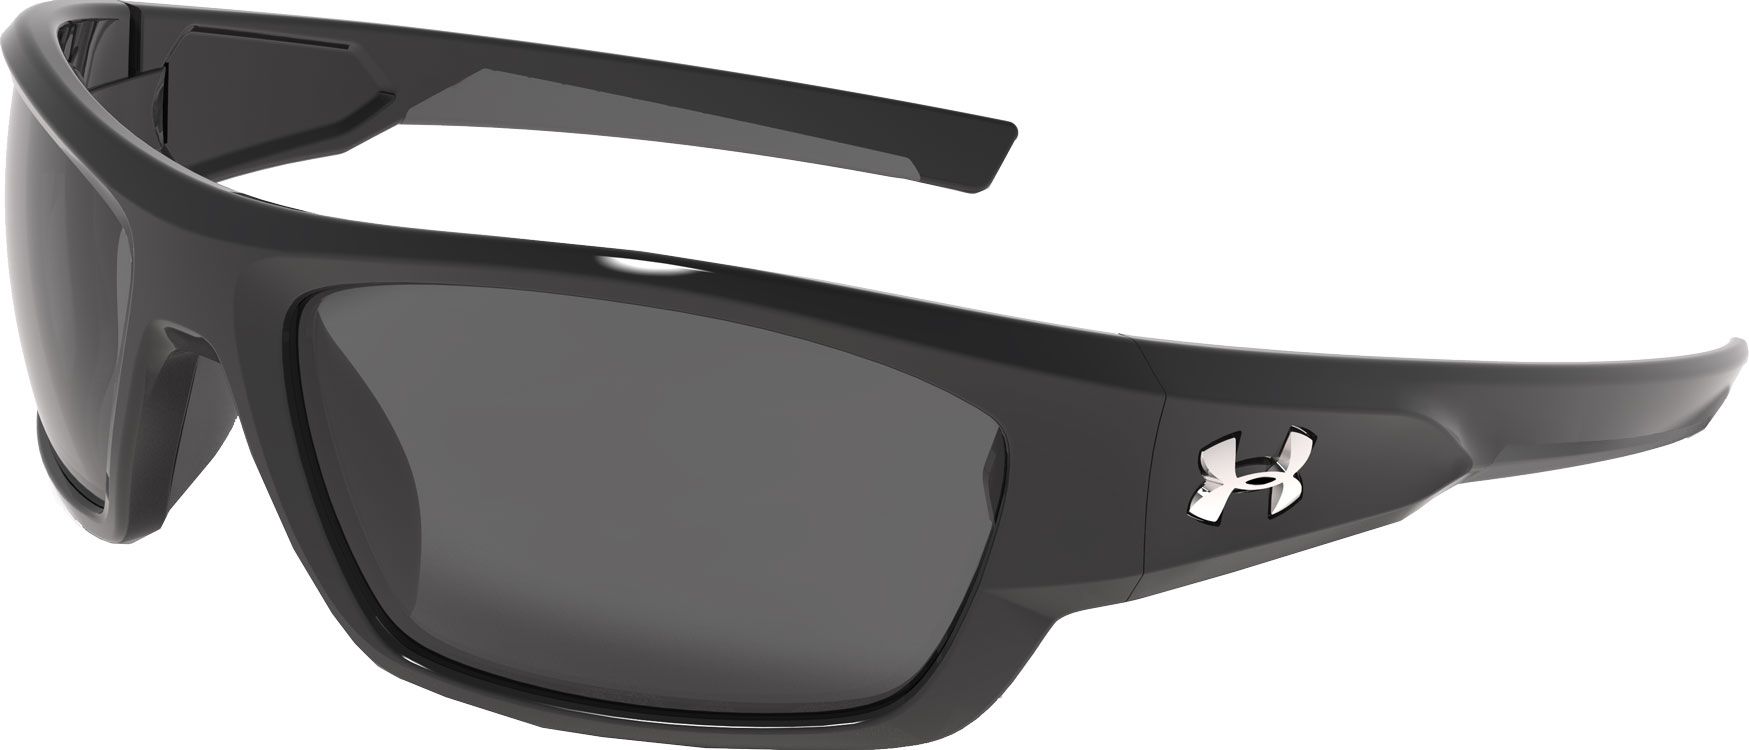 Under Armour Force Sunglasses | DICK'S 